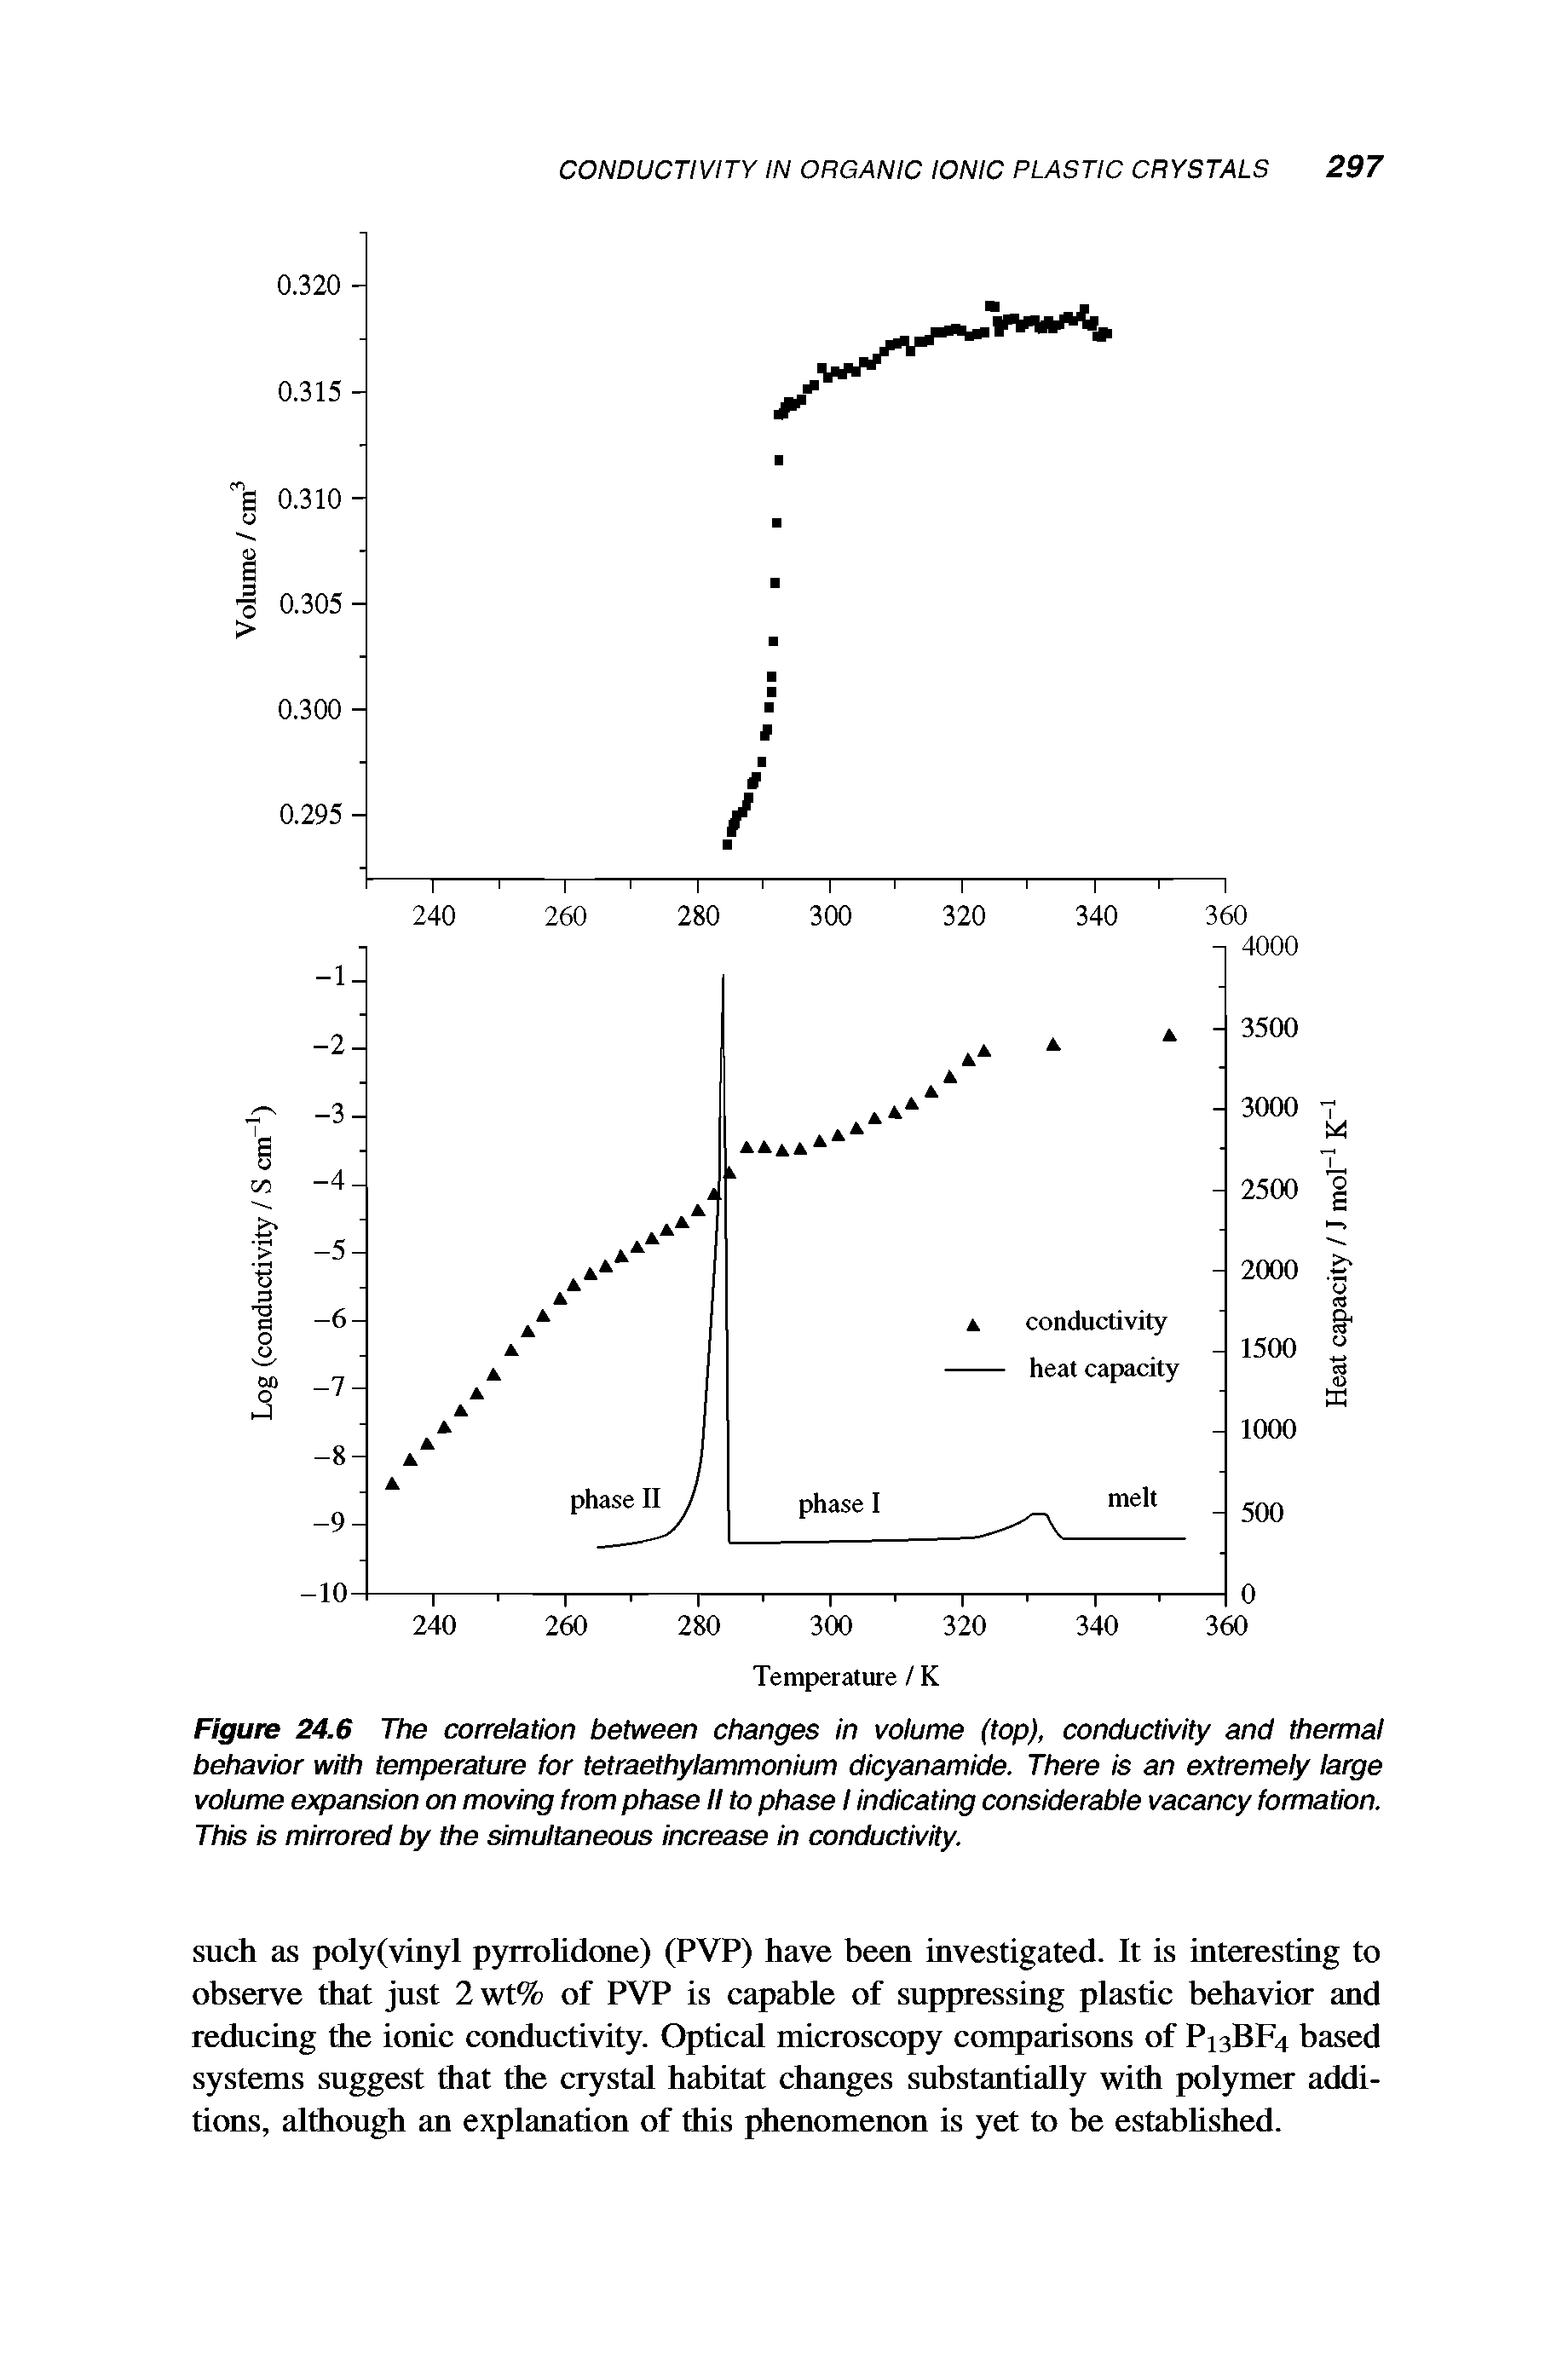 Figure 24.6 The correlation between changes in volume (top), conductivity and thermal behavior with temperature for tetraethylammonium dicyanamide. There is an extremely large volume expansion on moving from phase II to phase I indicating considerable vacancy formation. This is mirrored by the simultaneous increase in conductivity.